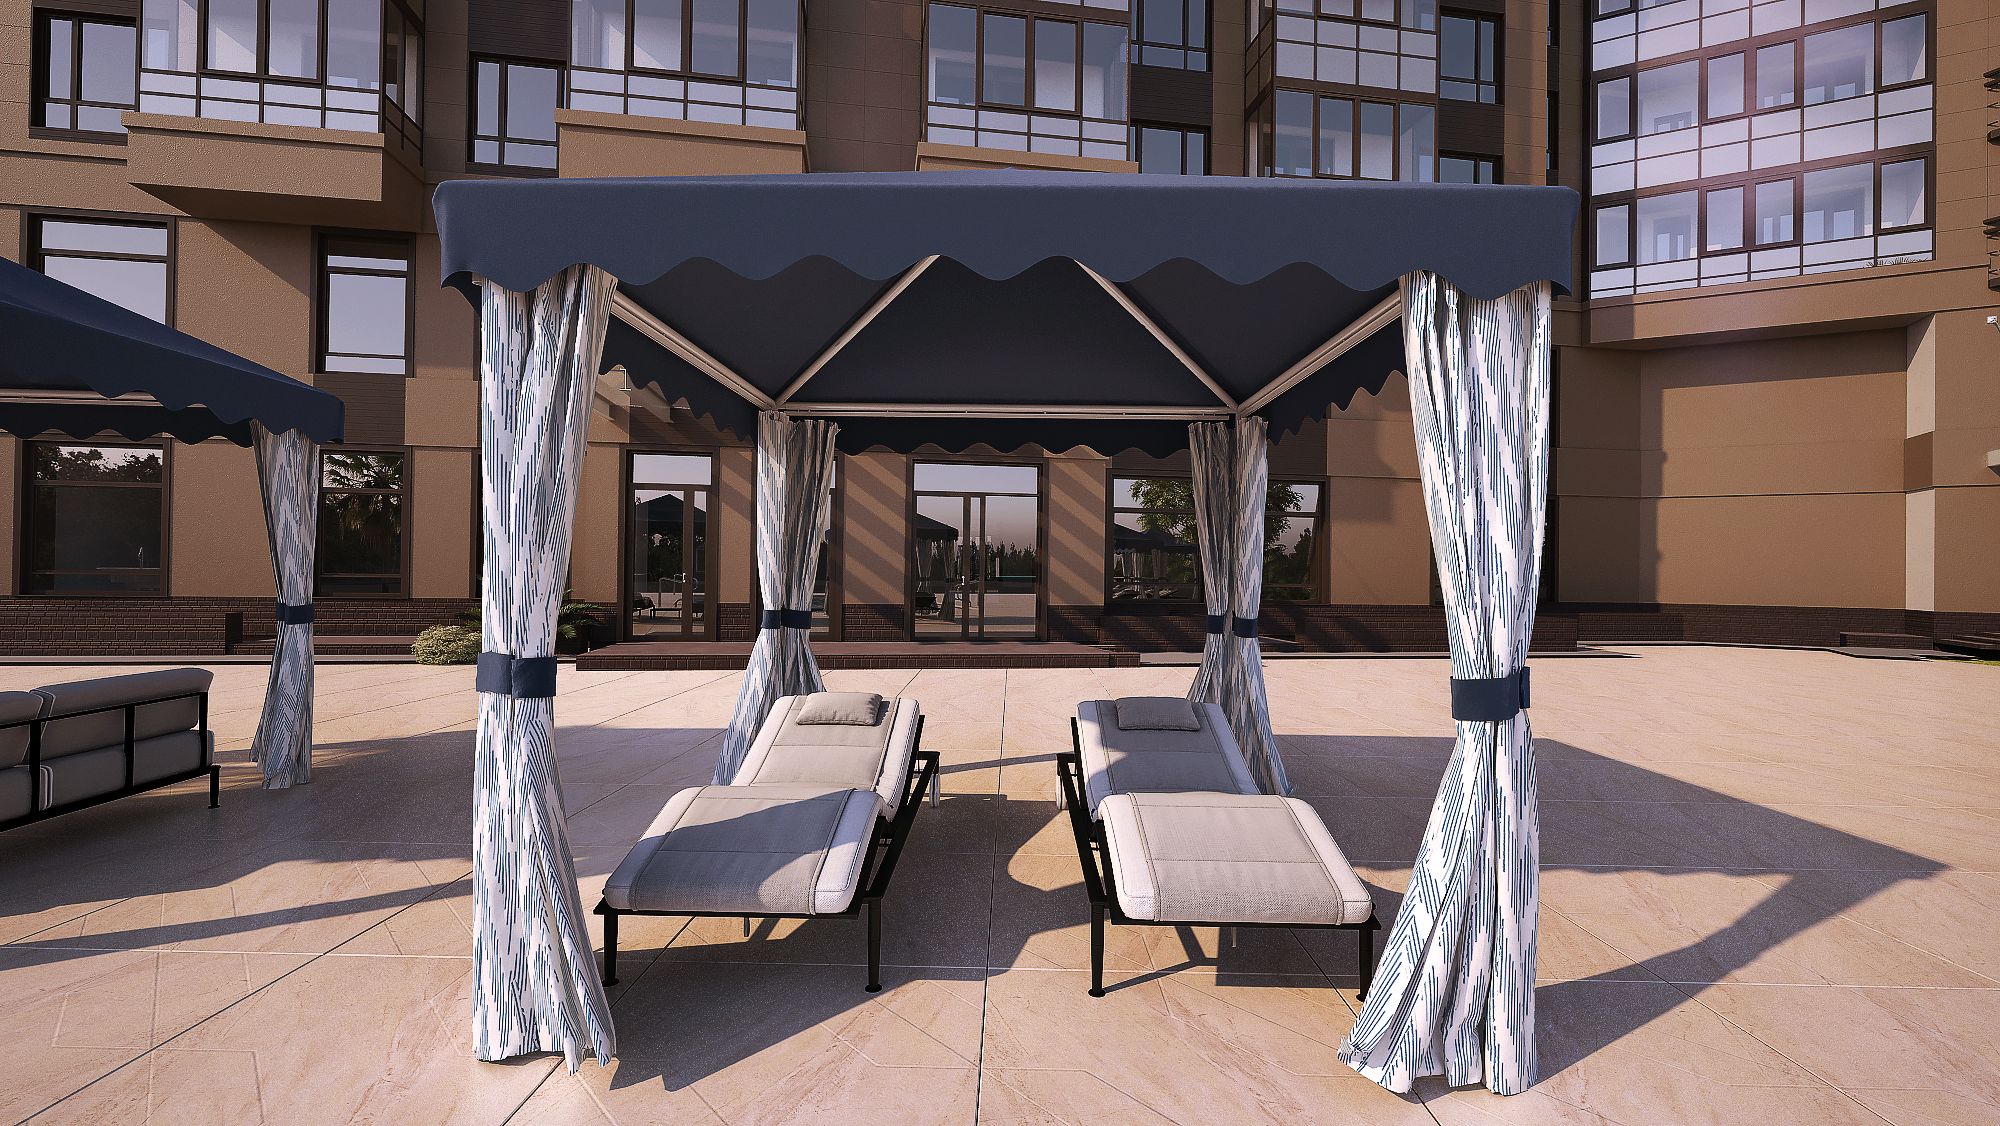 Academy Design's Executive cabana, photo taken from the front, showcasing its corrosion-resistant 6061-T6 aluminum frame with a marine-grade fabric peaked roof featuring a loose valance. The mock curtains, made of marine-grade upholstery fabric, wrap around the structure's posts to conceal hardware, epitomizing luxury for upscale hospitality settings.